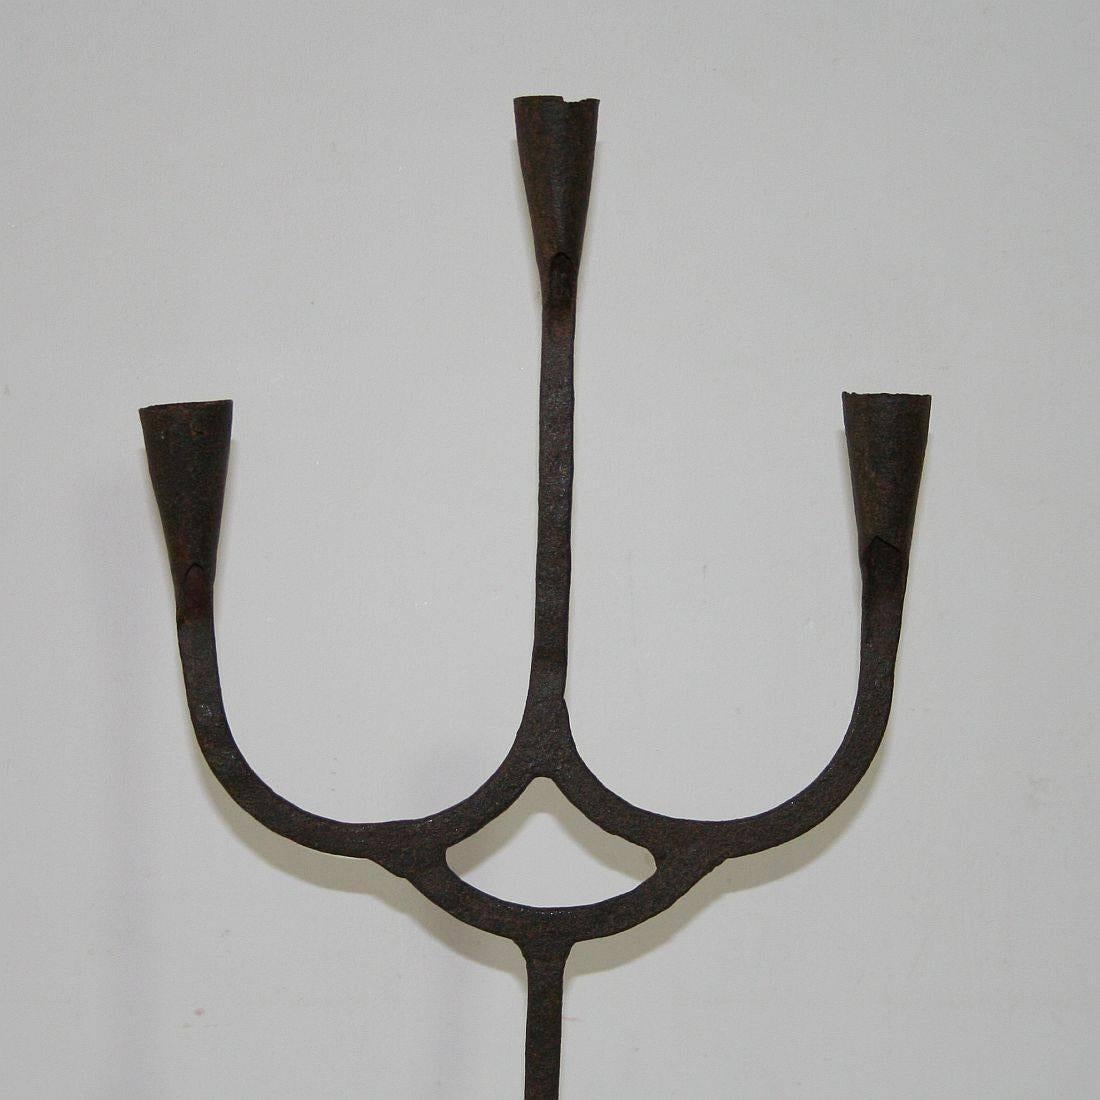 Spanish Pair of 18th-19th Century Hand-Forged Iron Candleholders